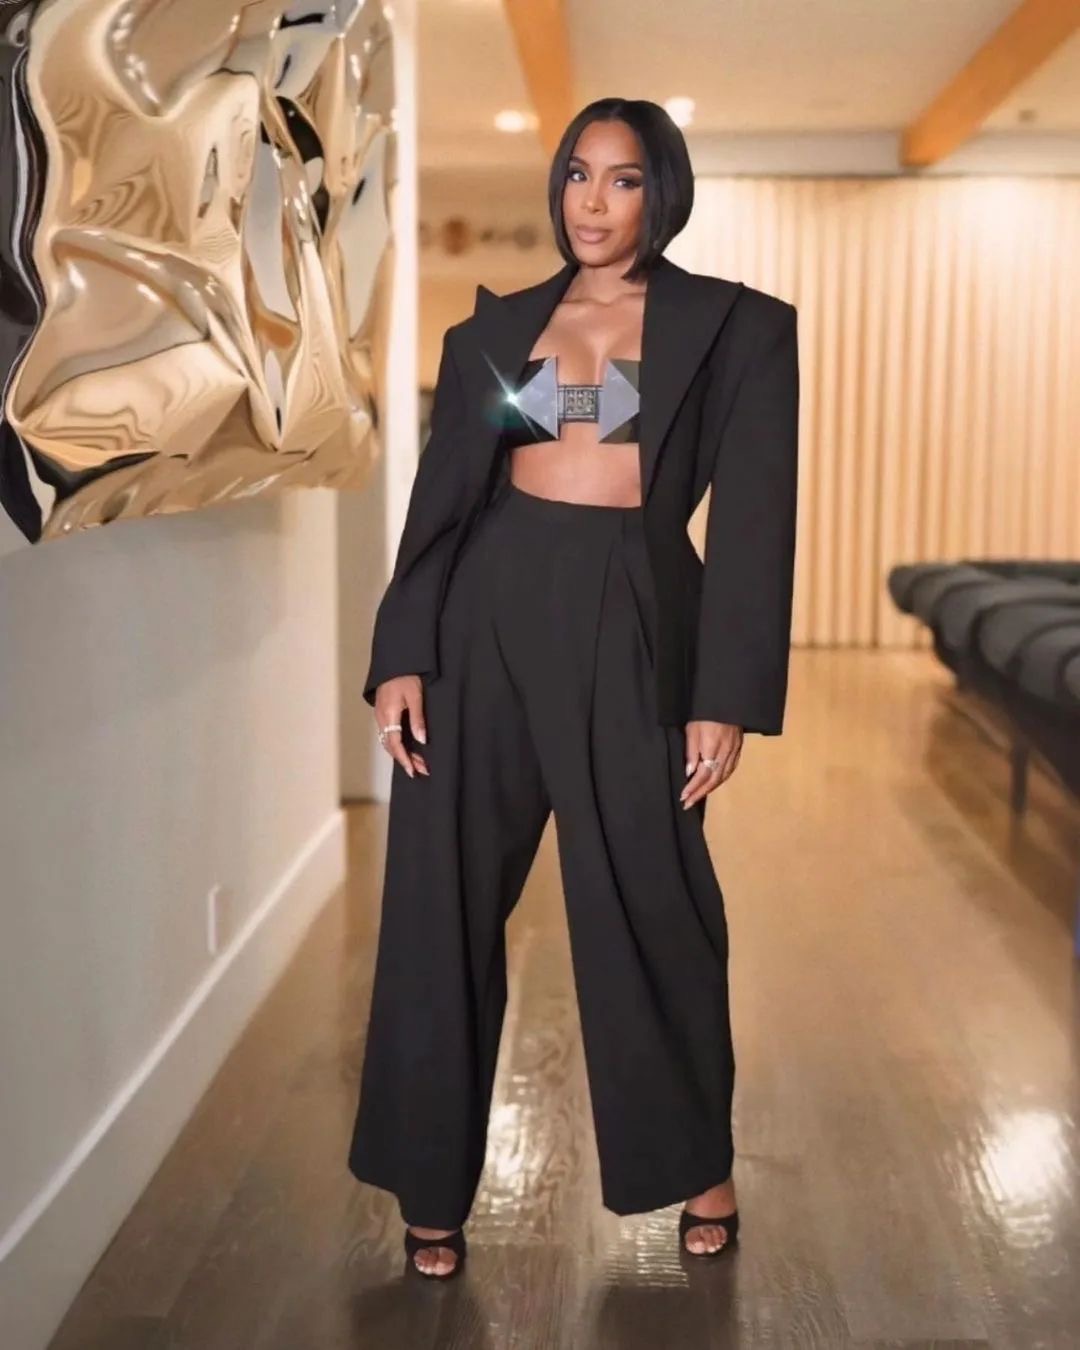 Kelly Rowland Wore a Black Giuseppe Di Morabito Look with a Metal Ashton Michael Bra and Black Ricagno Heels 3